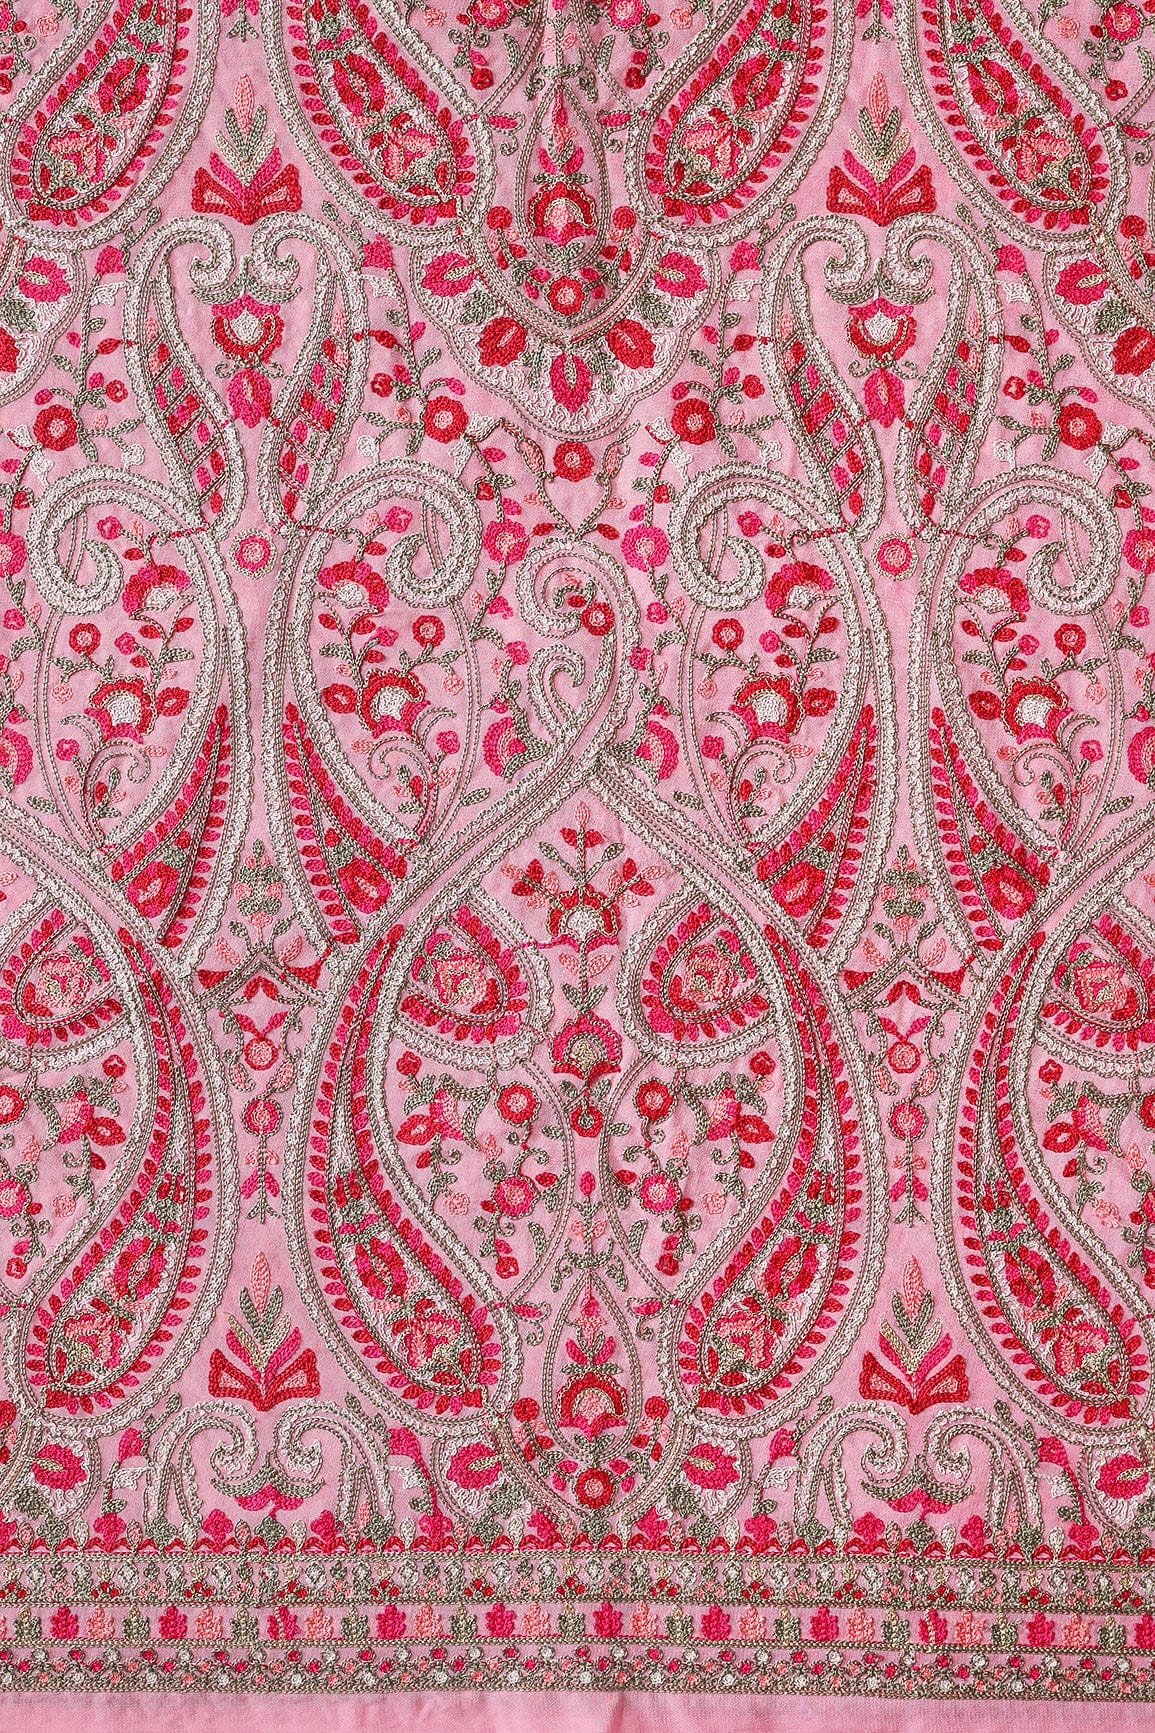 doeraa Embroidery Fabrics Multi Thread With Zari Paisley Embroidery On Pink Viscose Georgette Fabric